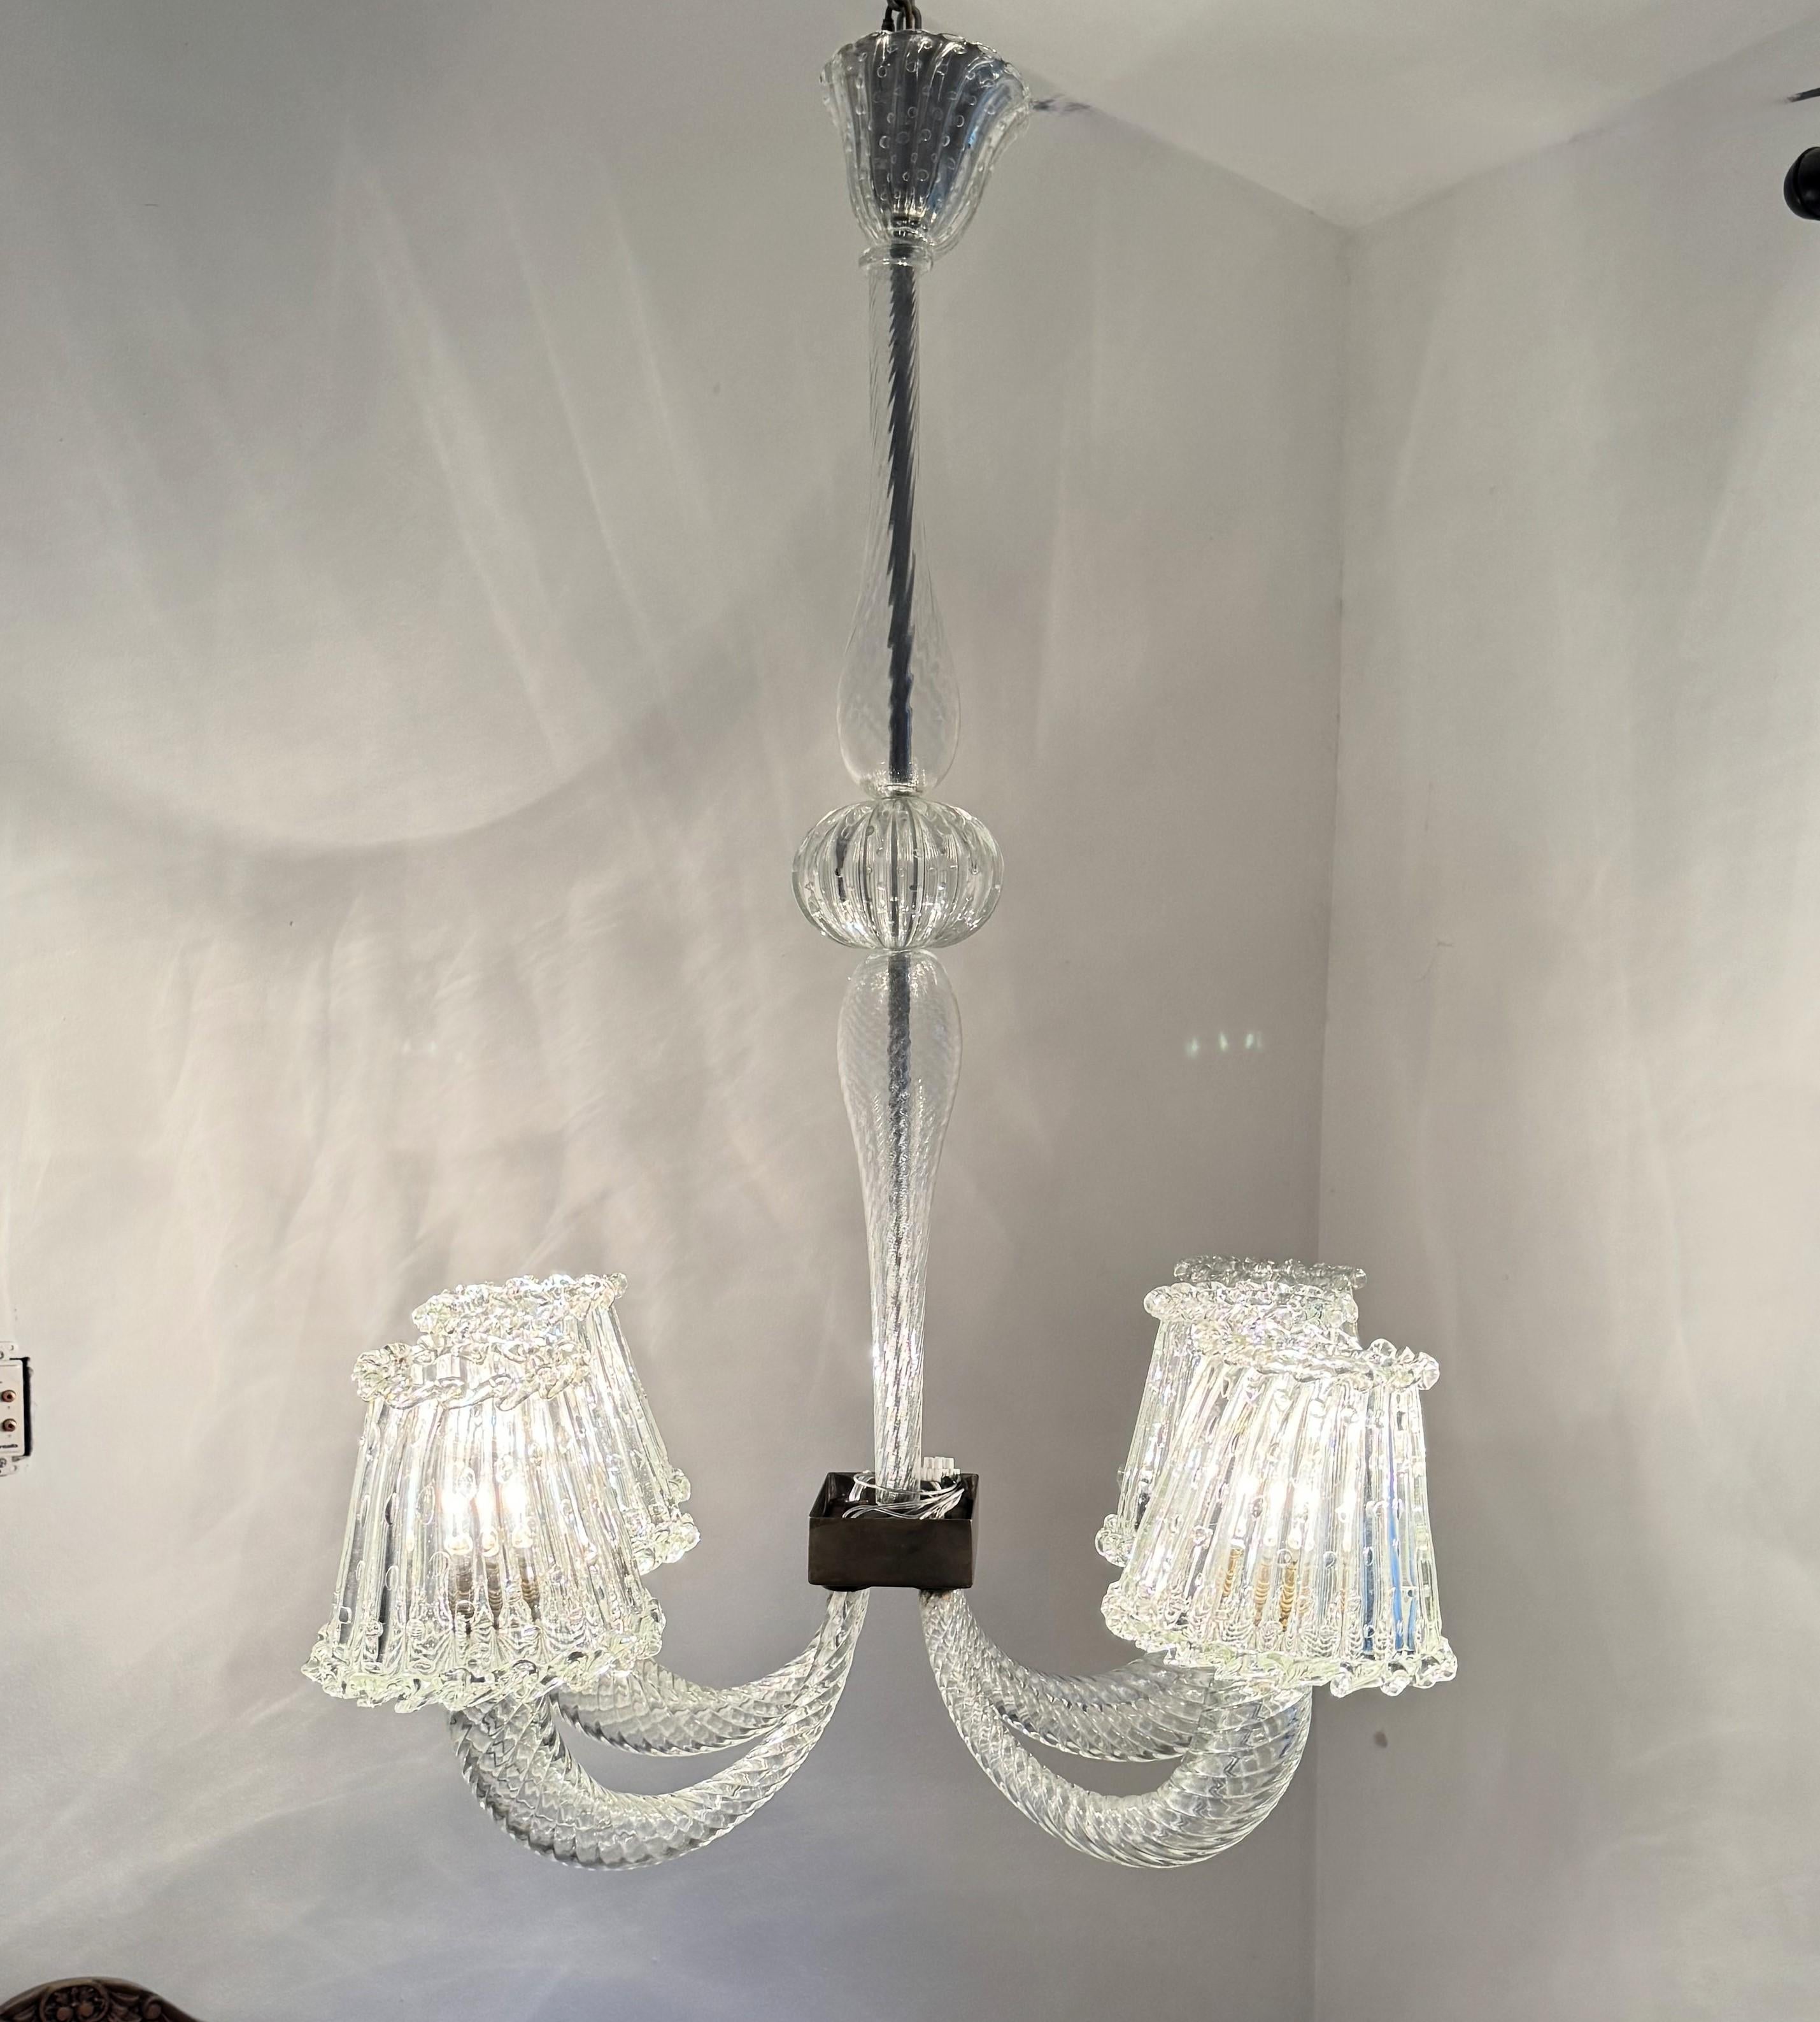 Art Deco Six Light Chandelier Attr. Barovier & Toso, Murano, Italy ca. 1930 For Sale 6